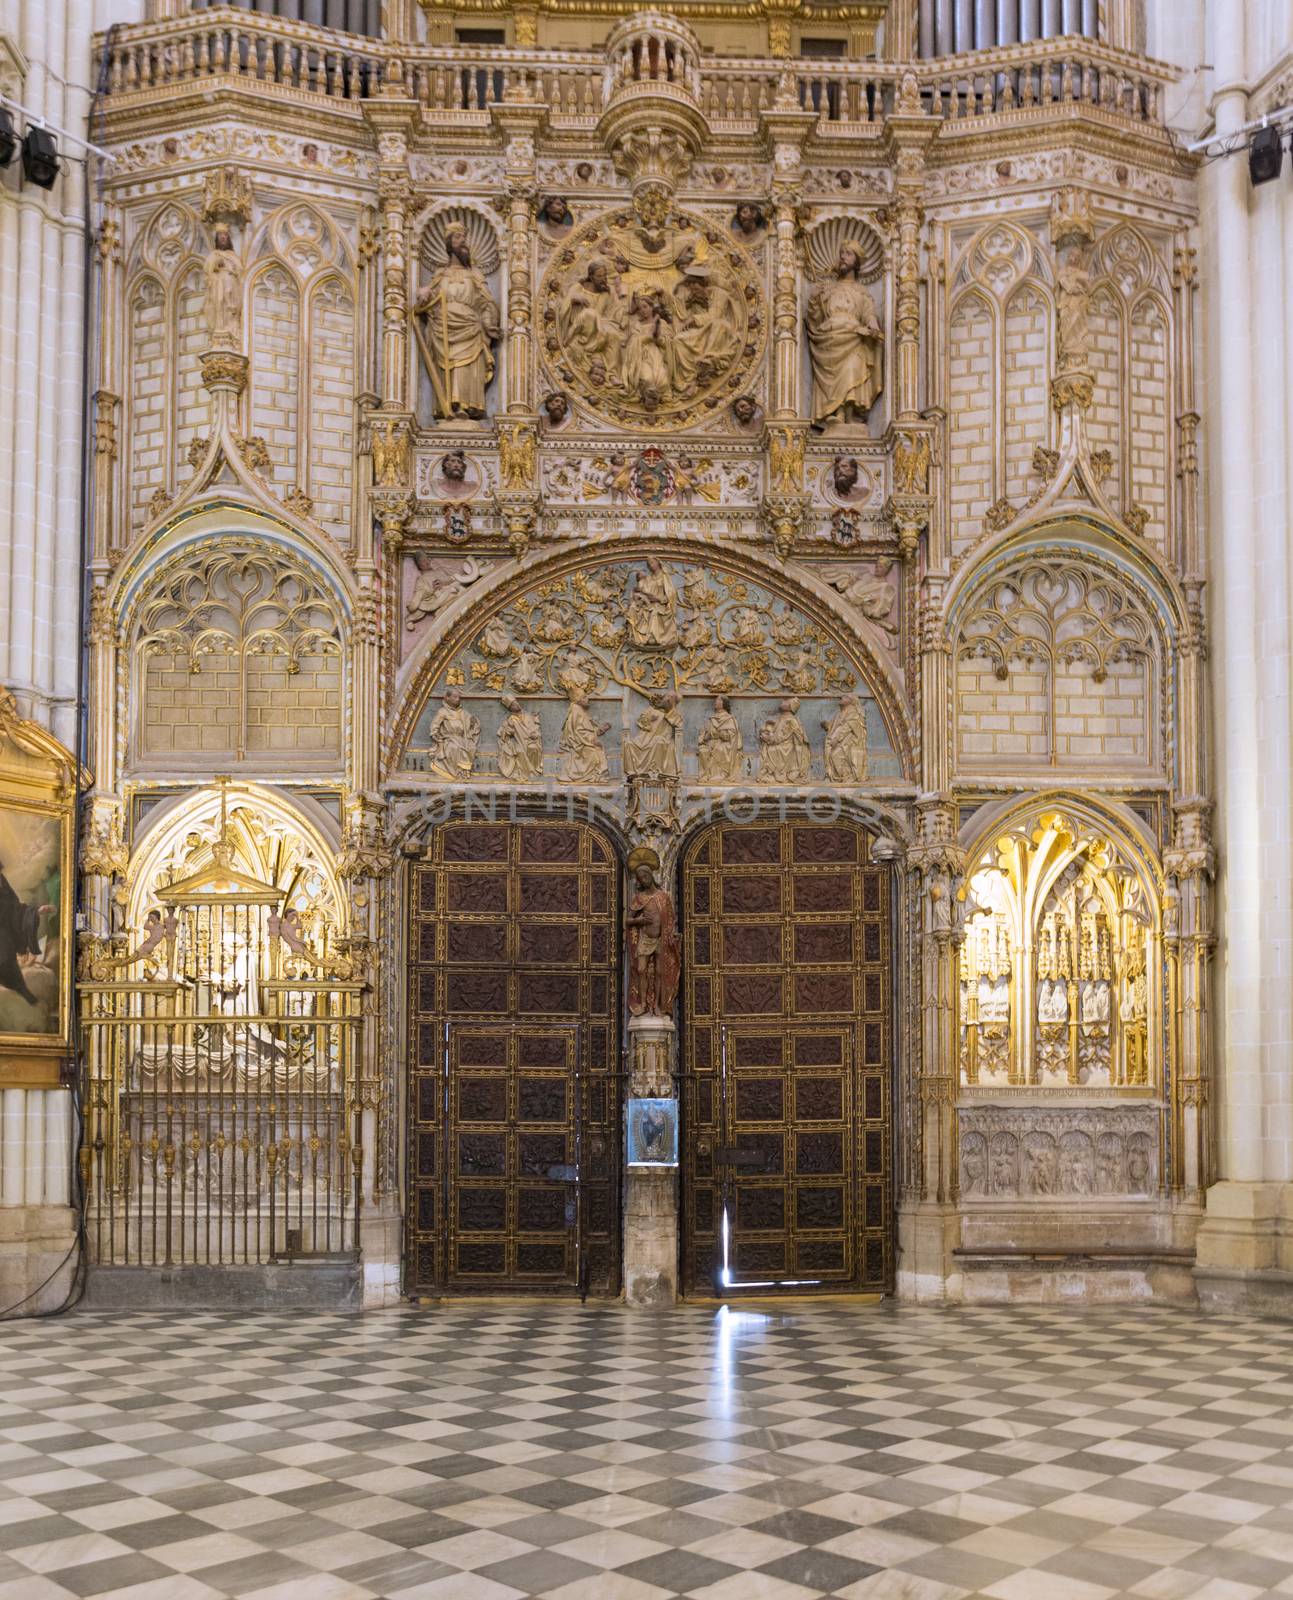 TOLEDO, SPAIN - MAY 19, 2014: Door and ornaments in Cathedral Pr by fisfra